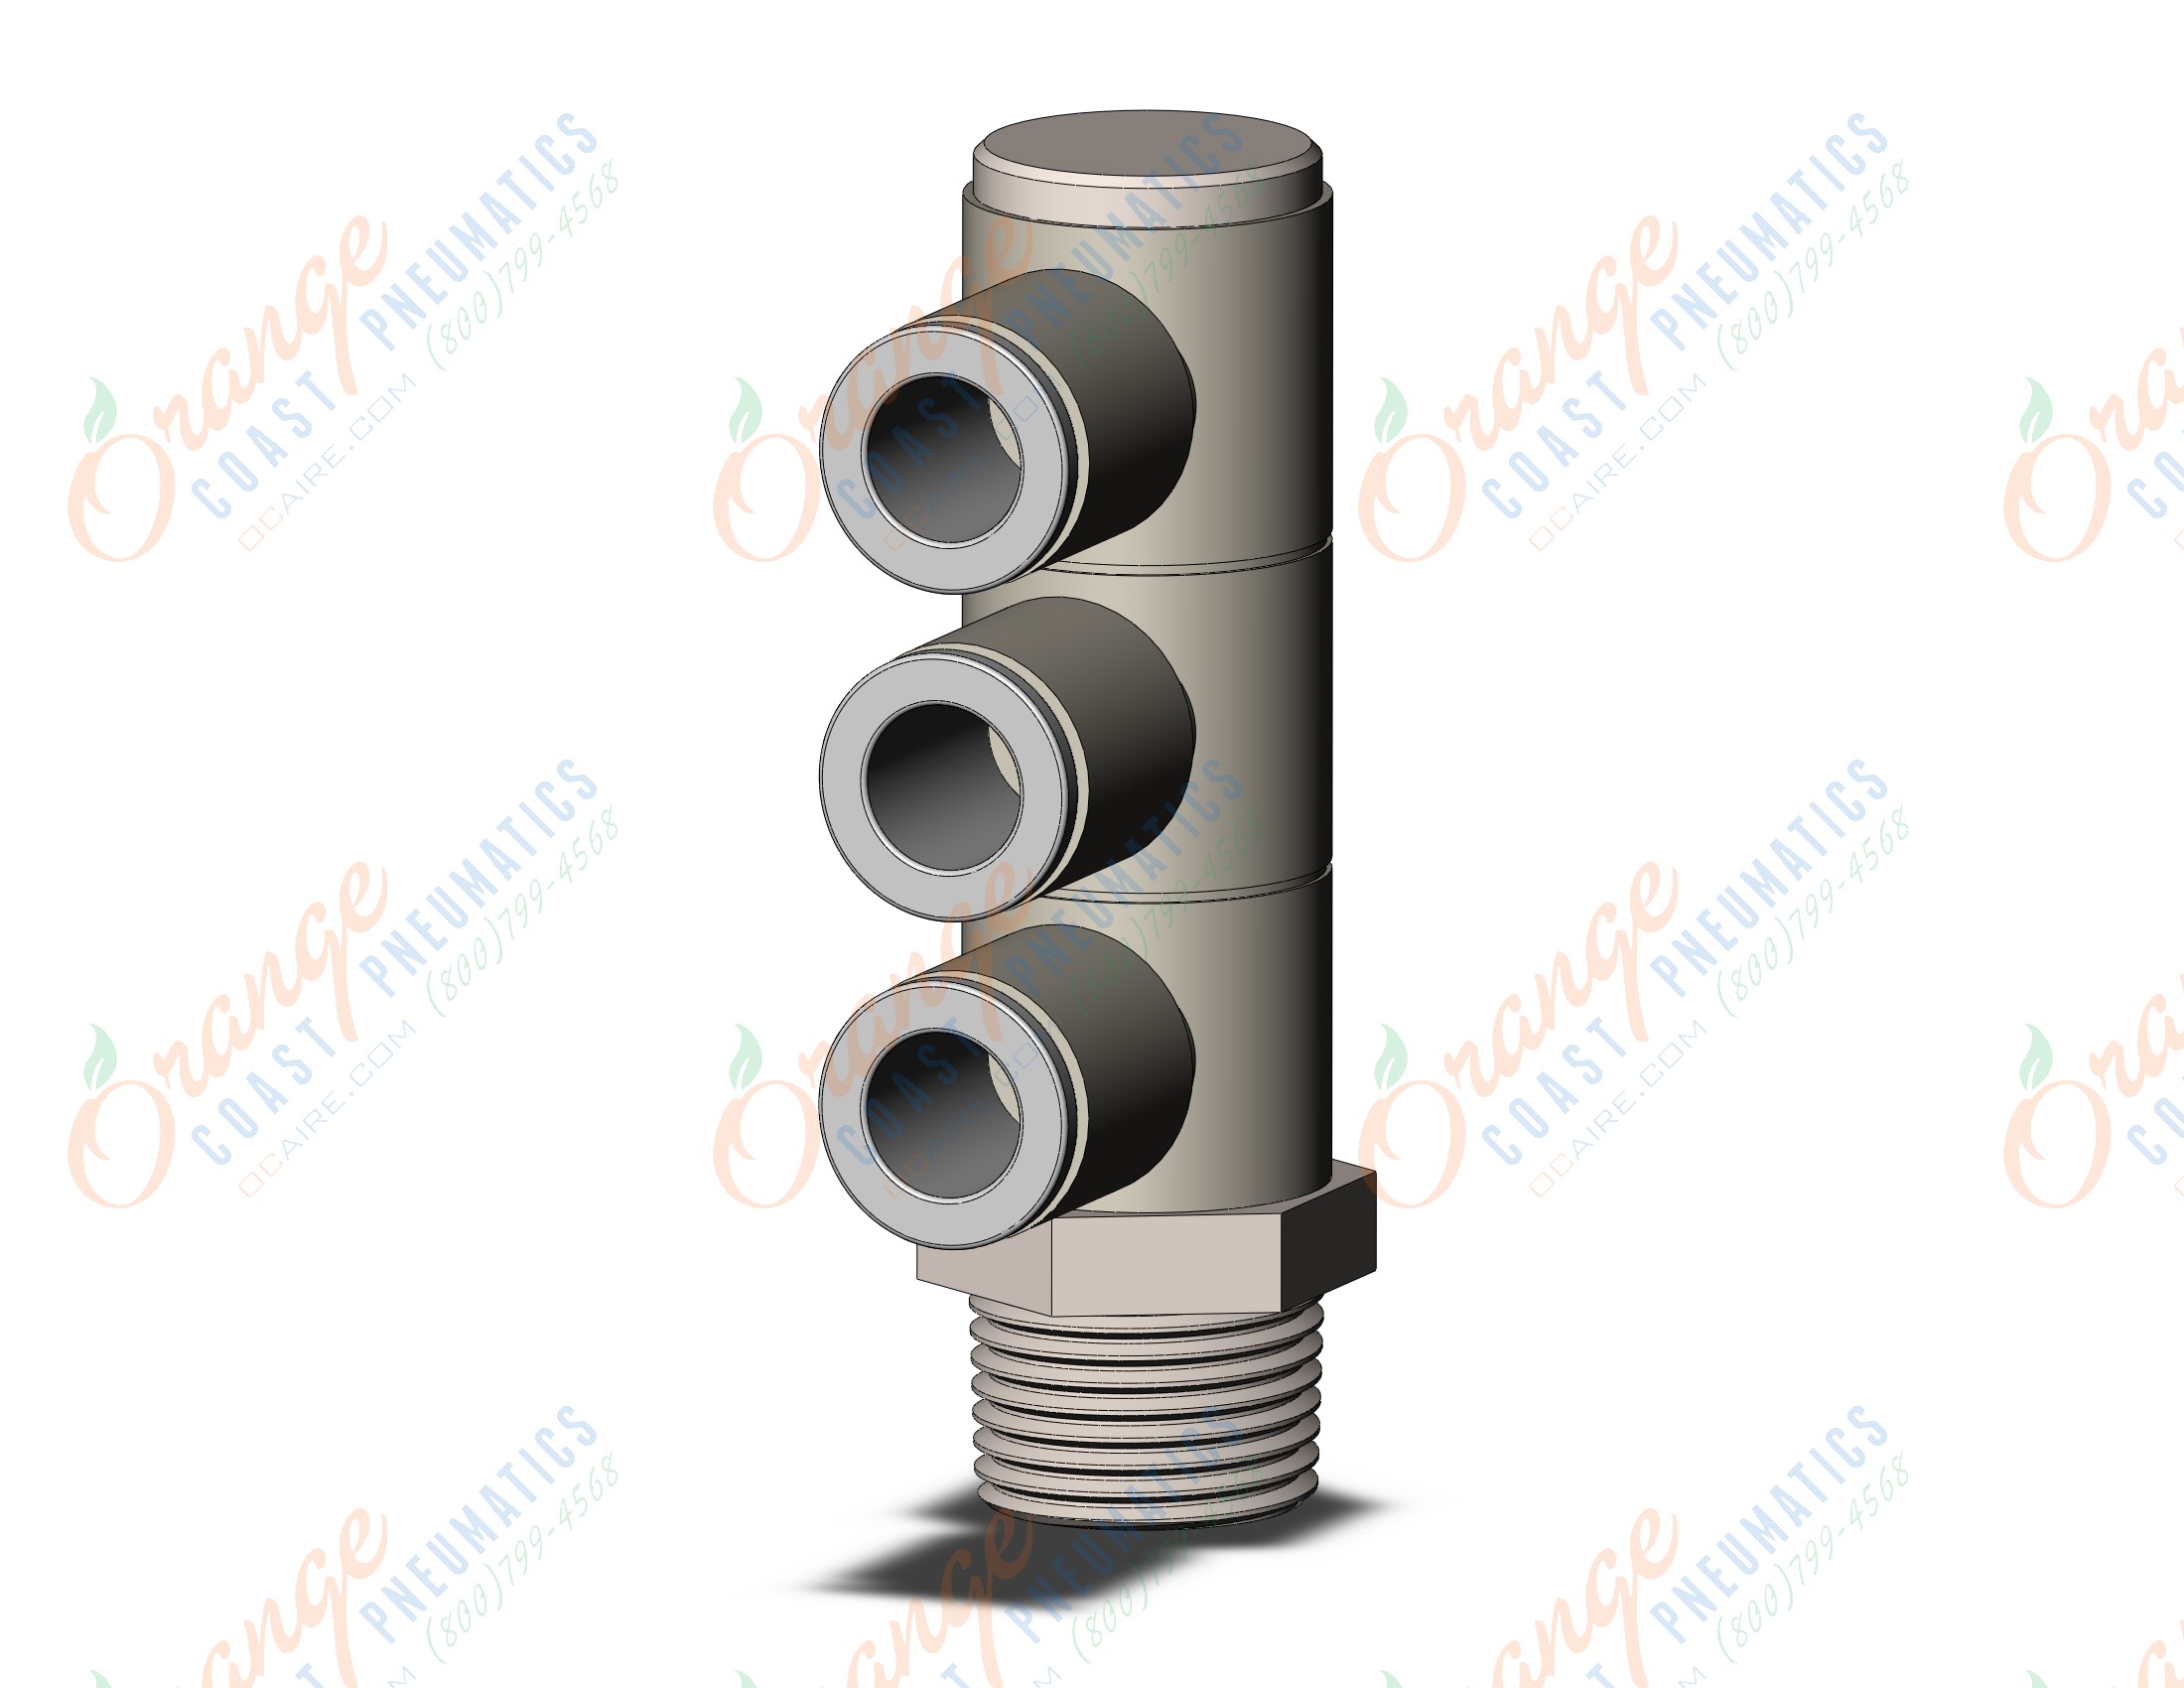 SMC KQ2VT08-03NS fitting, tple uni male elbow, KQ2 FITTING (sold in packages of 10; price is per piece)